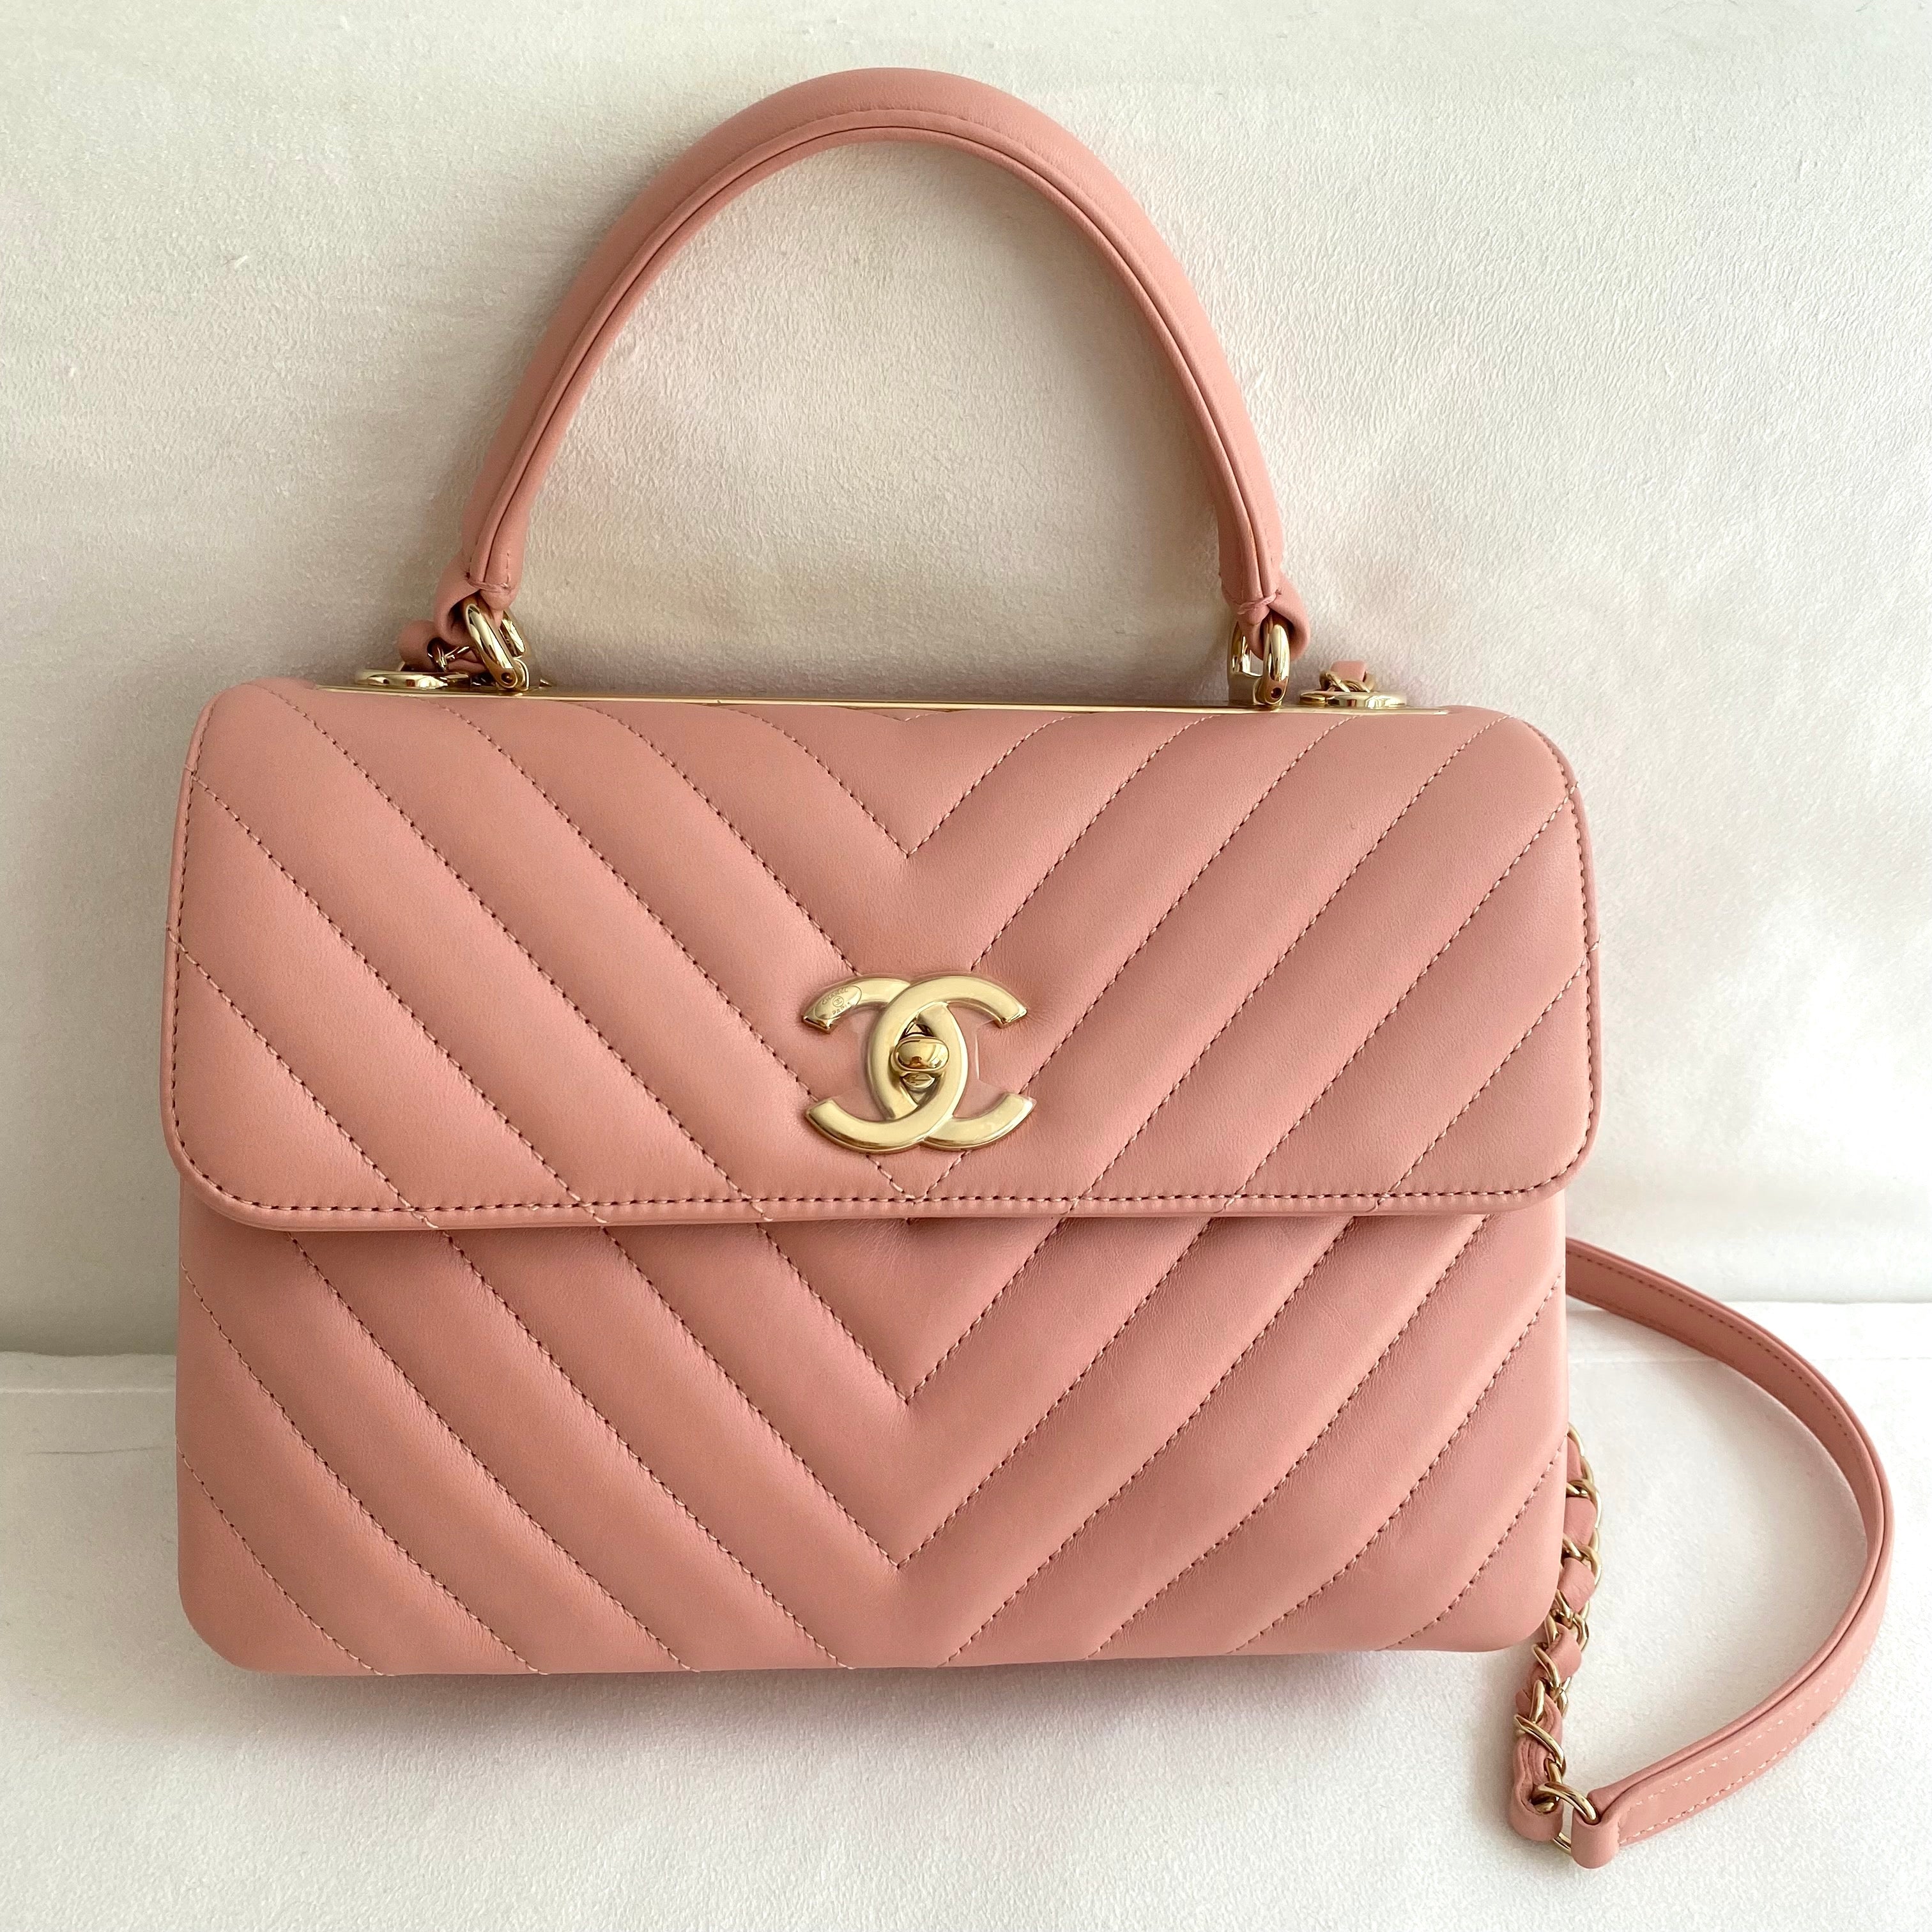 CHANELSmall Trendy CC Flap Bag with Top Handle in Chevron Pink Lambskin